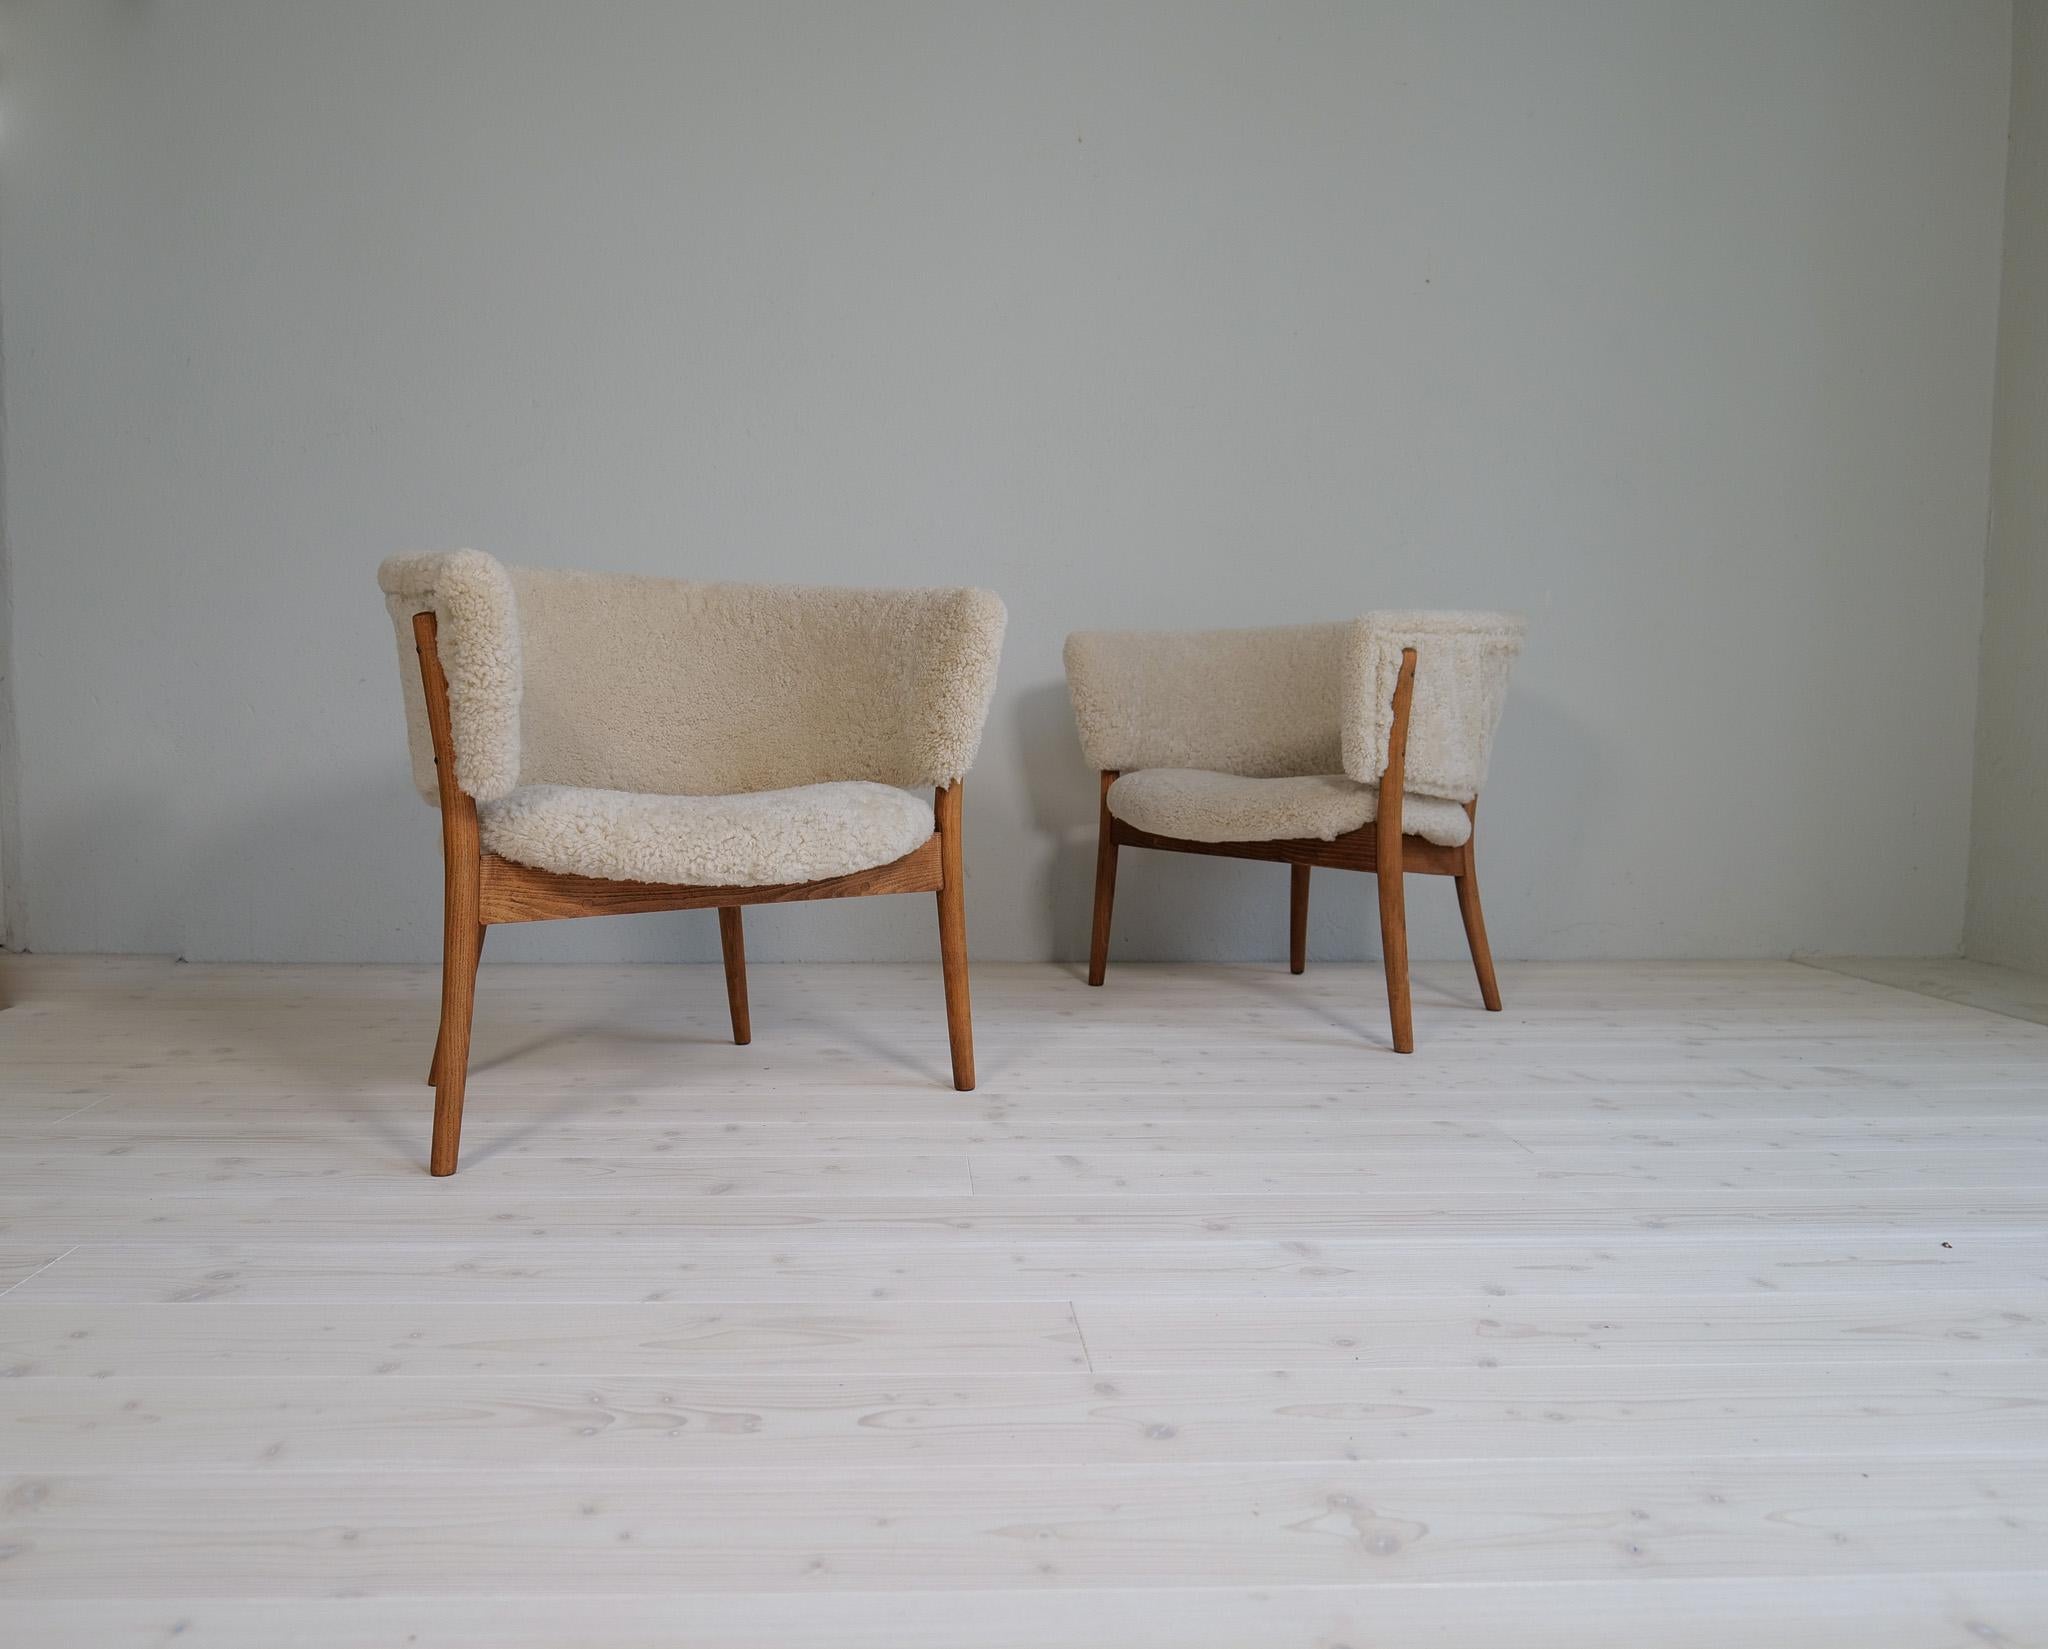 These two wonderfully crafted chairs were made in Sweden 1962 and design by Erik Wörts. The chairs made in stained birch and sheepskin has been redone both in the wooden part as well all new upholstery with quality sheepskin. The shearling is made